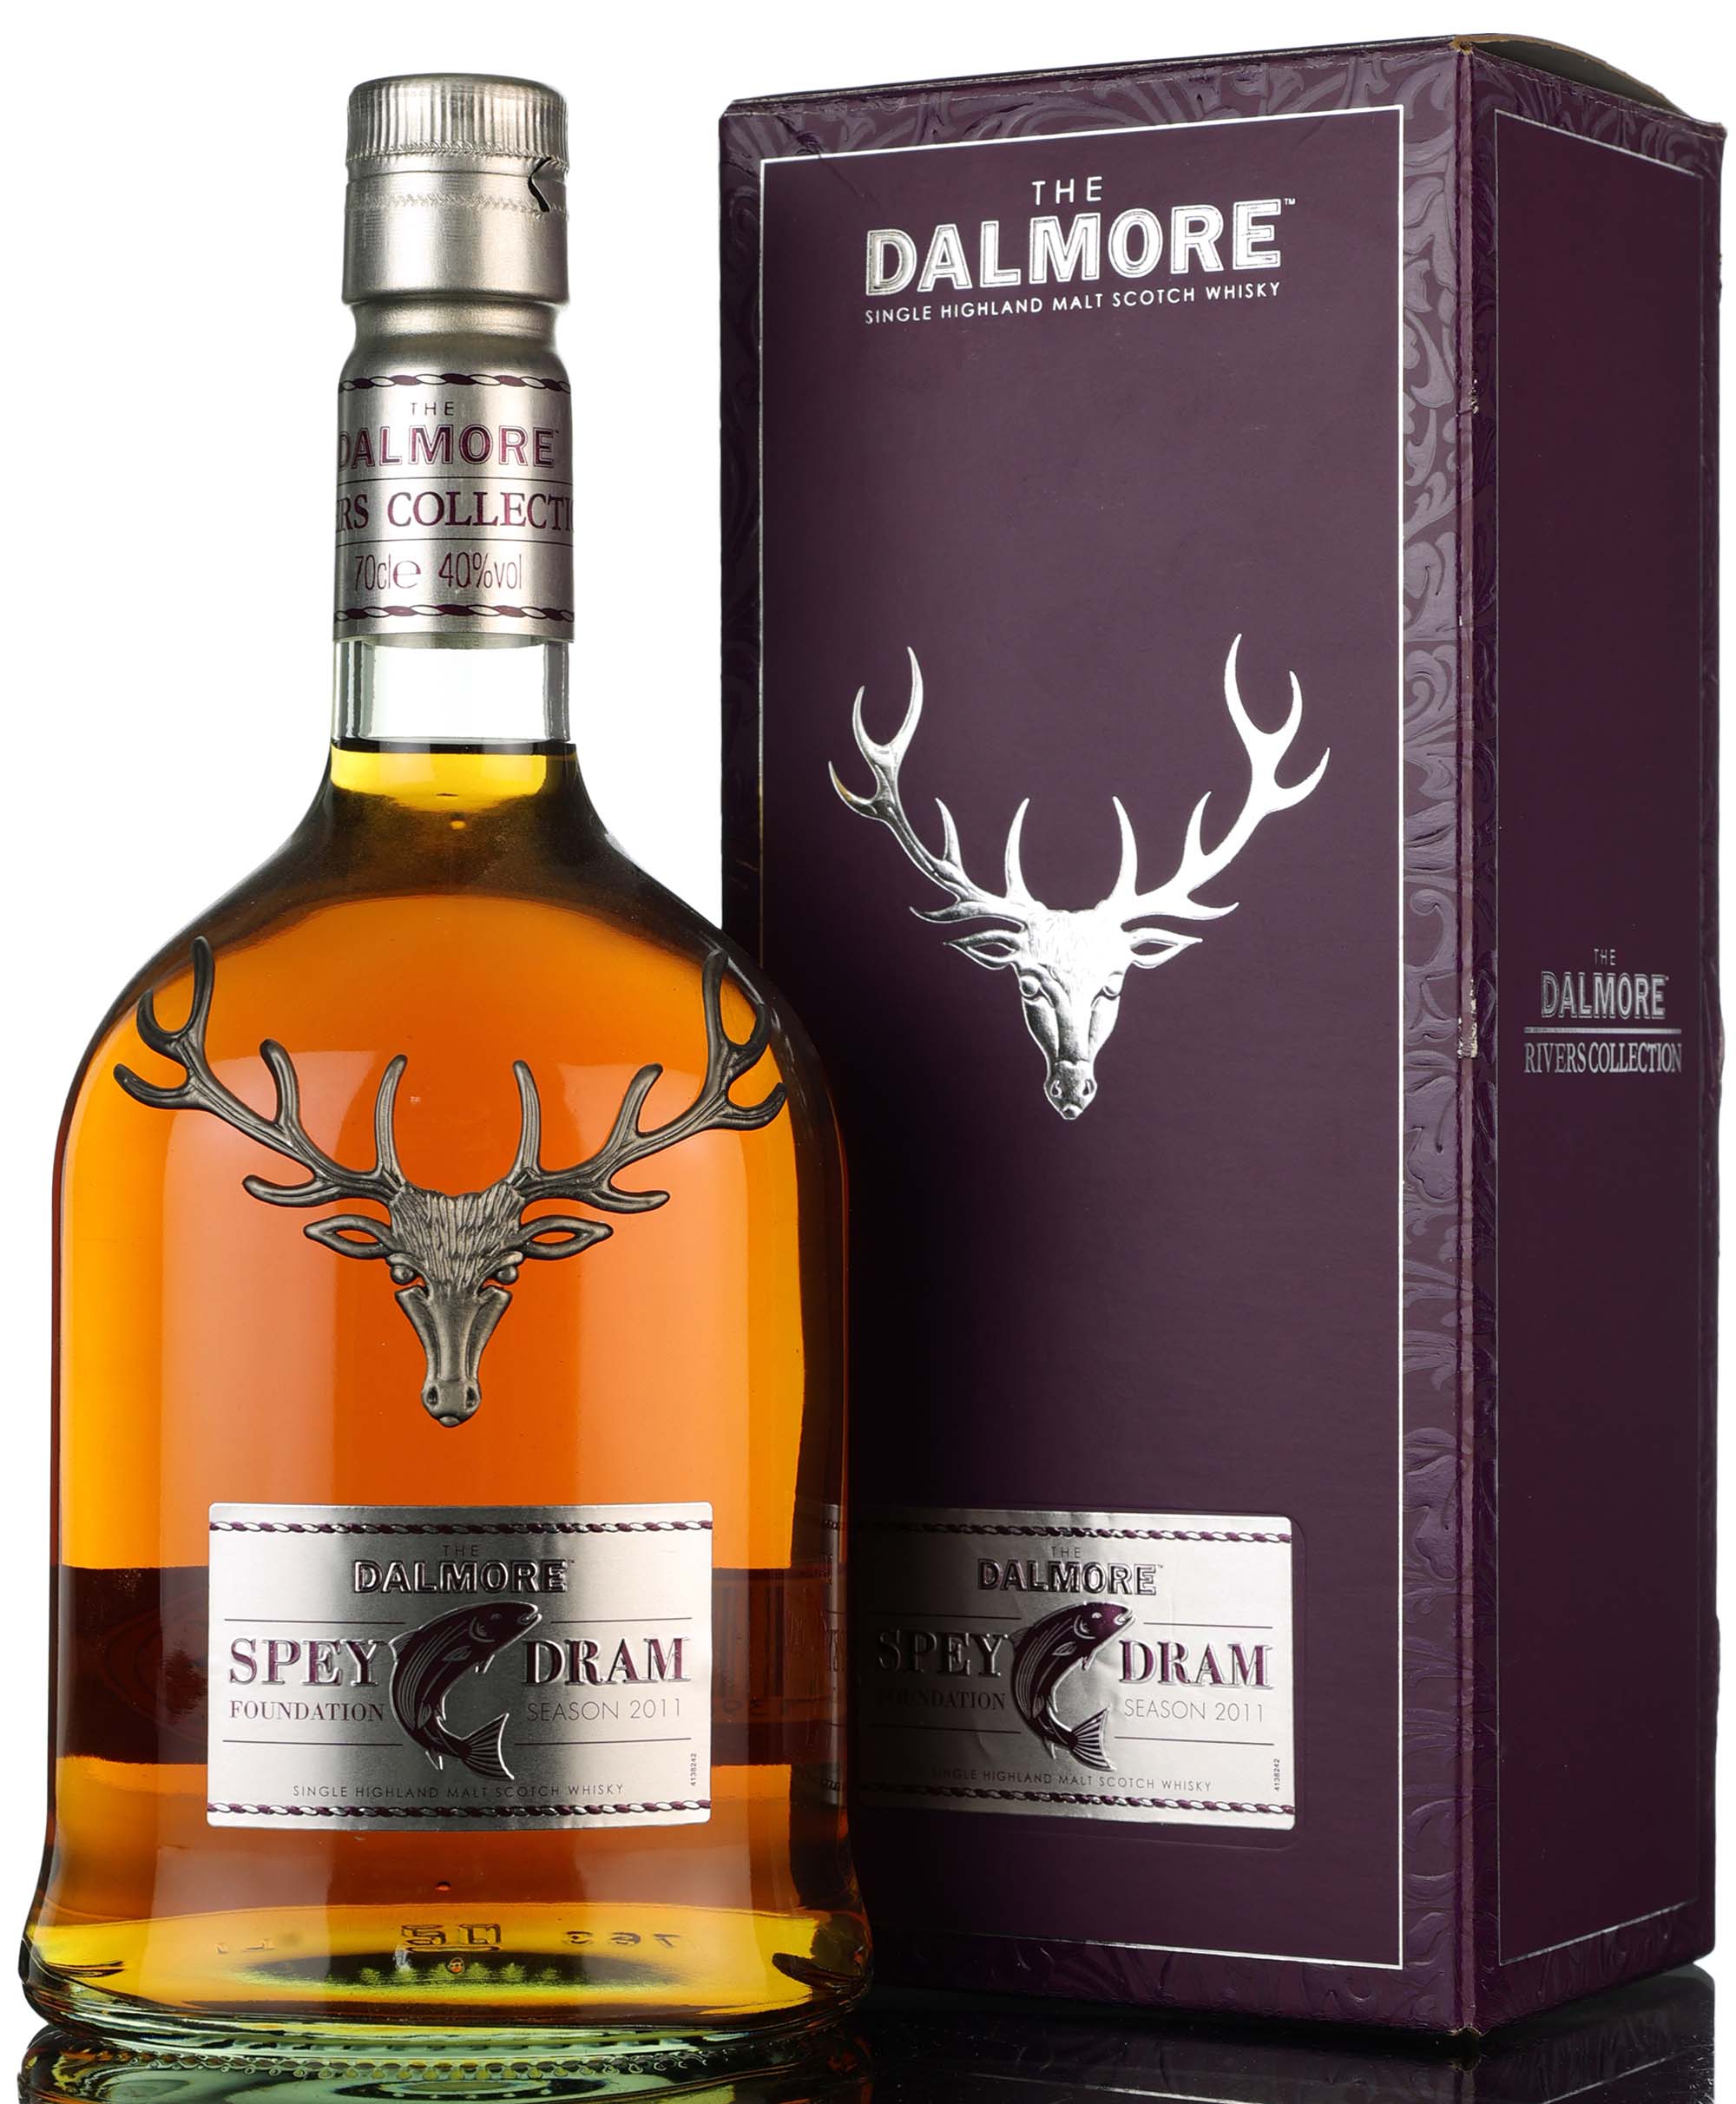 Dalmore Rivers Collection - Spey Dram - 2011 Release